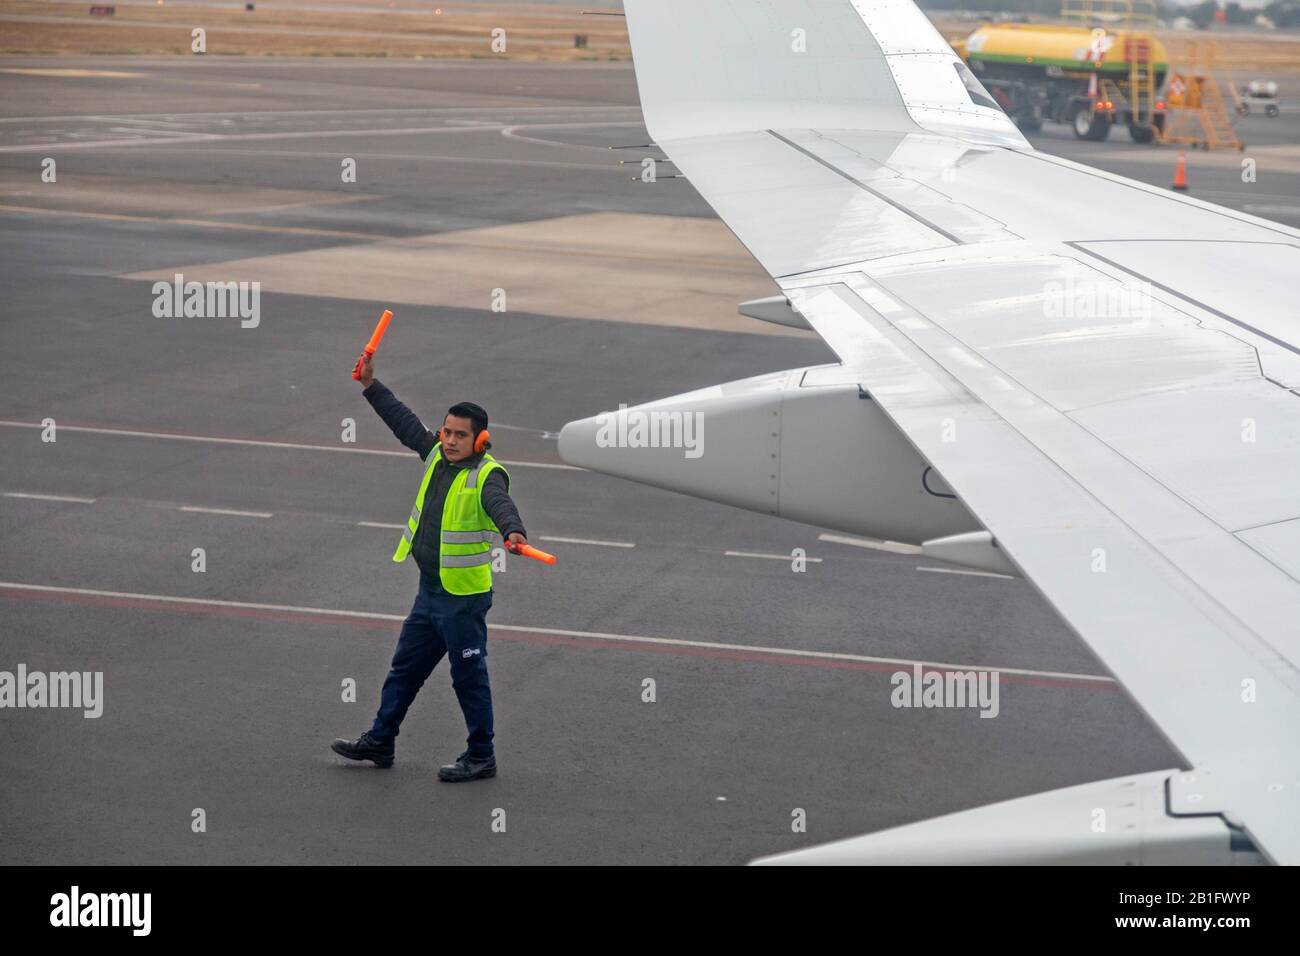 Oaxaca, Mexico - A worker on the tarmac directs an American Airlines jet as it is backed away from the gate at Xoxocotlán International Airport. Stock Photo